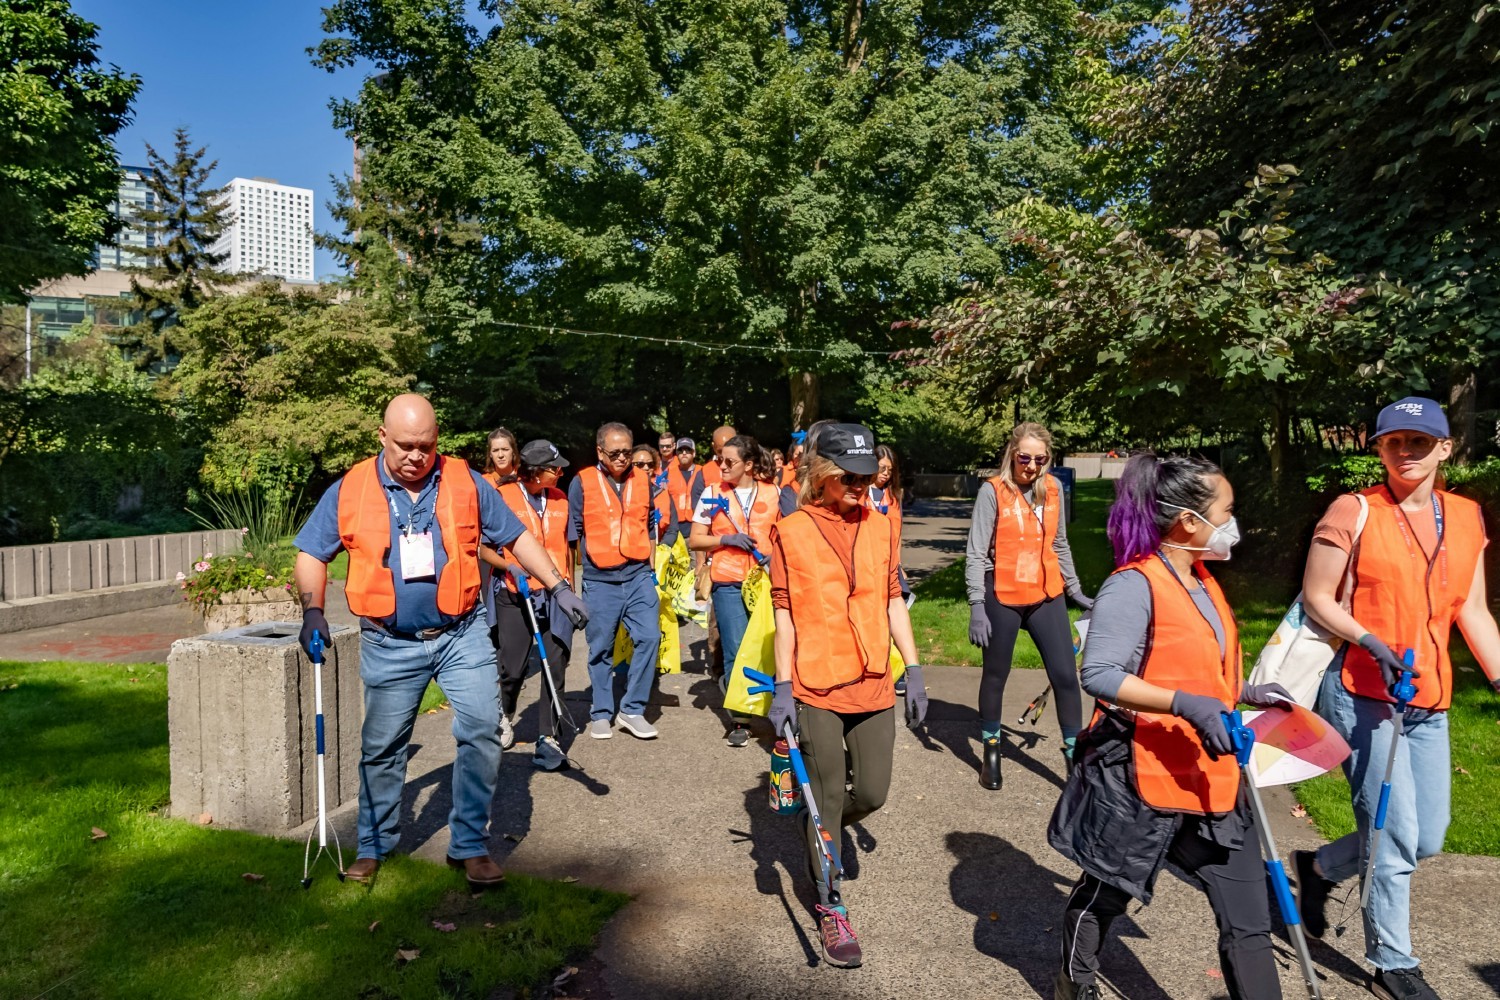 Smartsheet employees and customers join together in a community clean-up service project in Seattle.